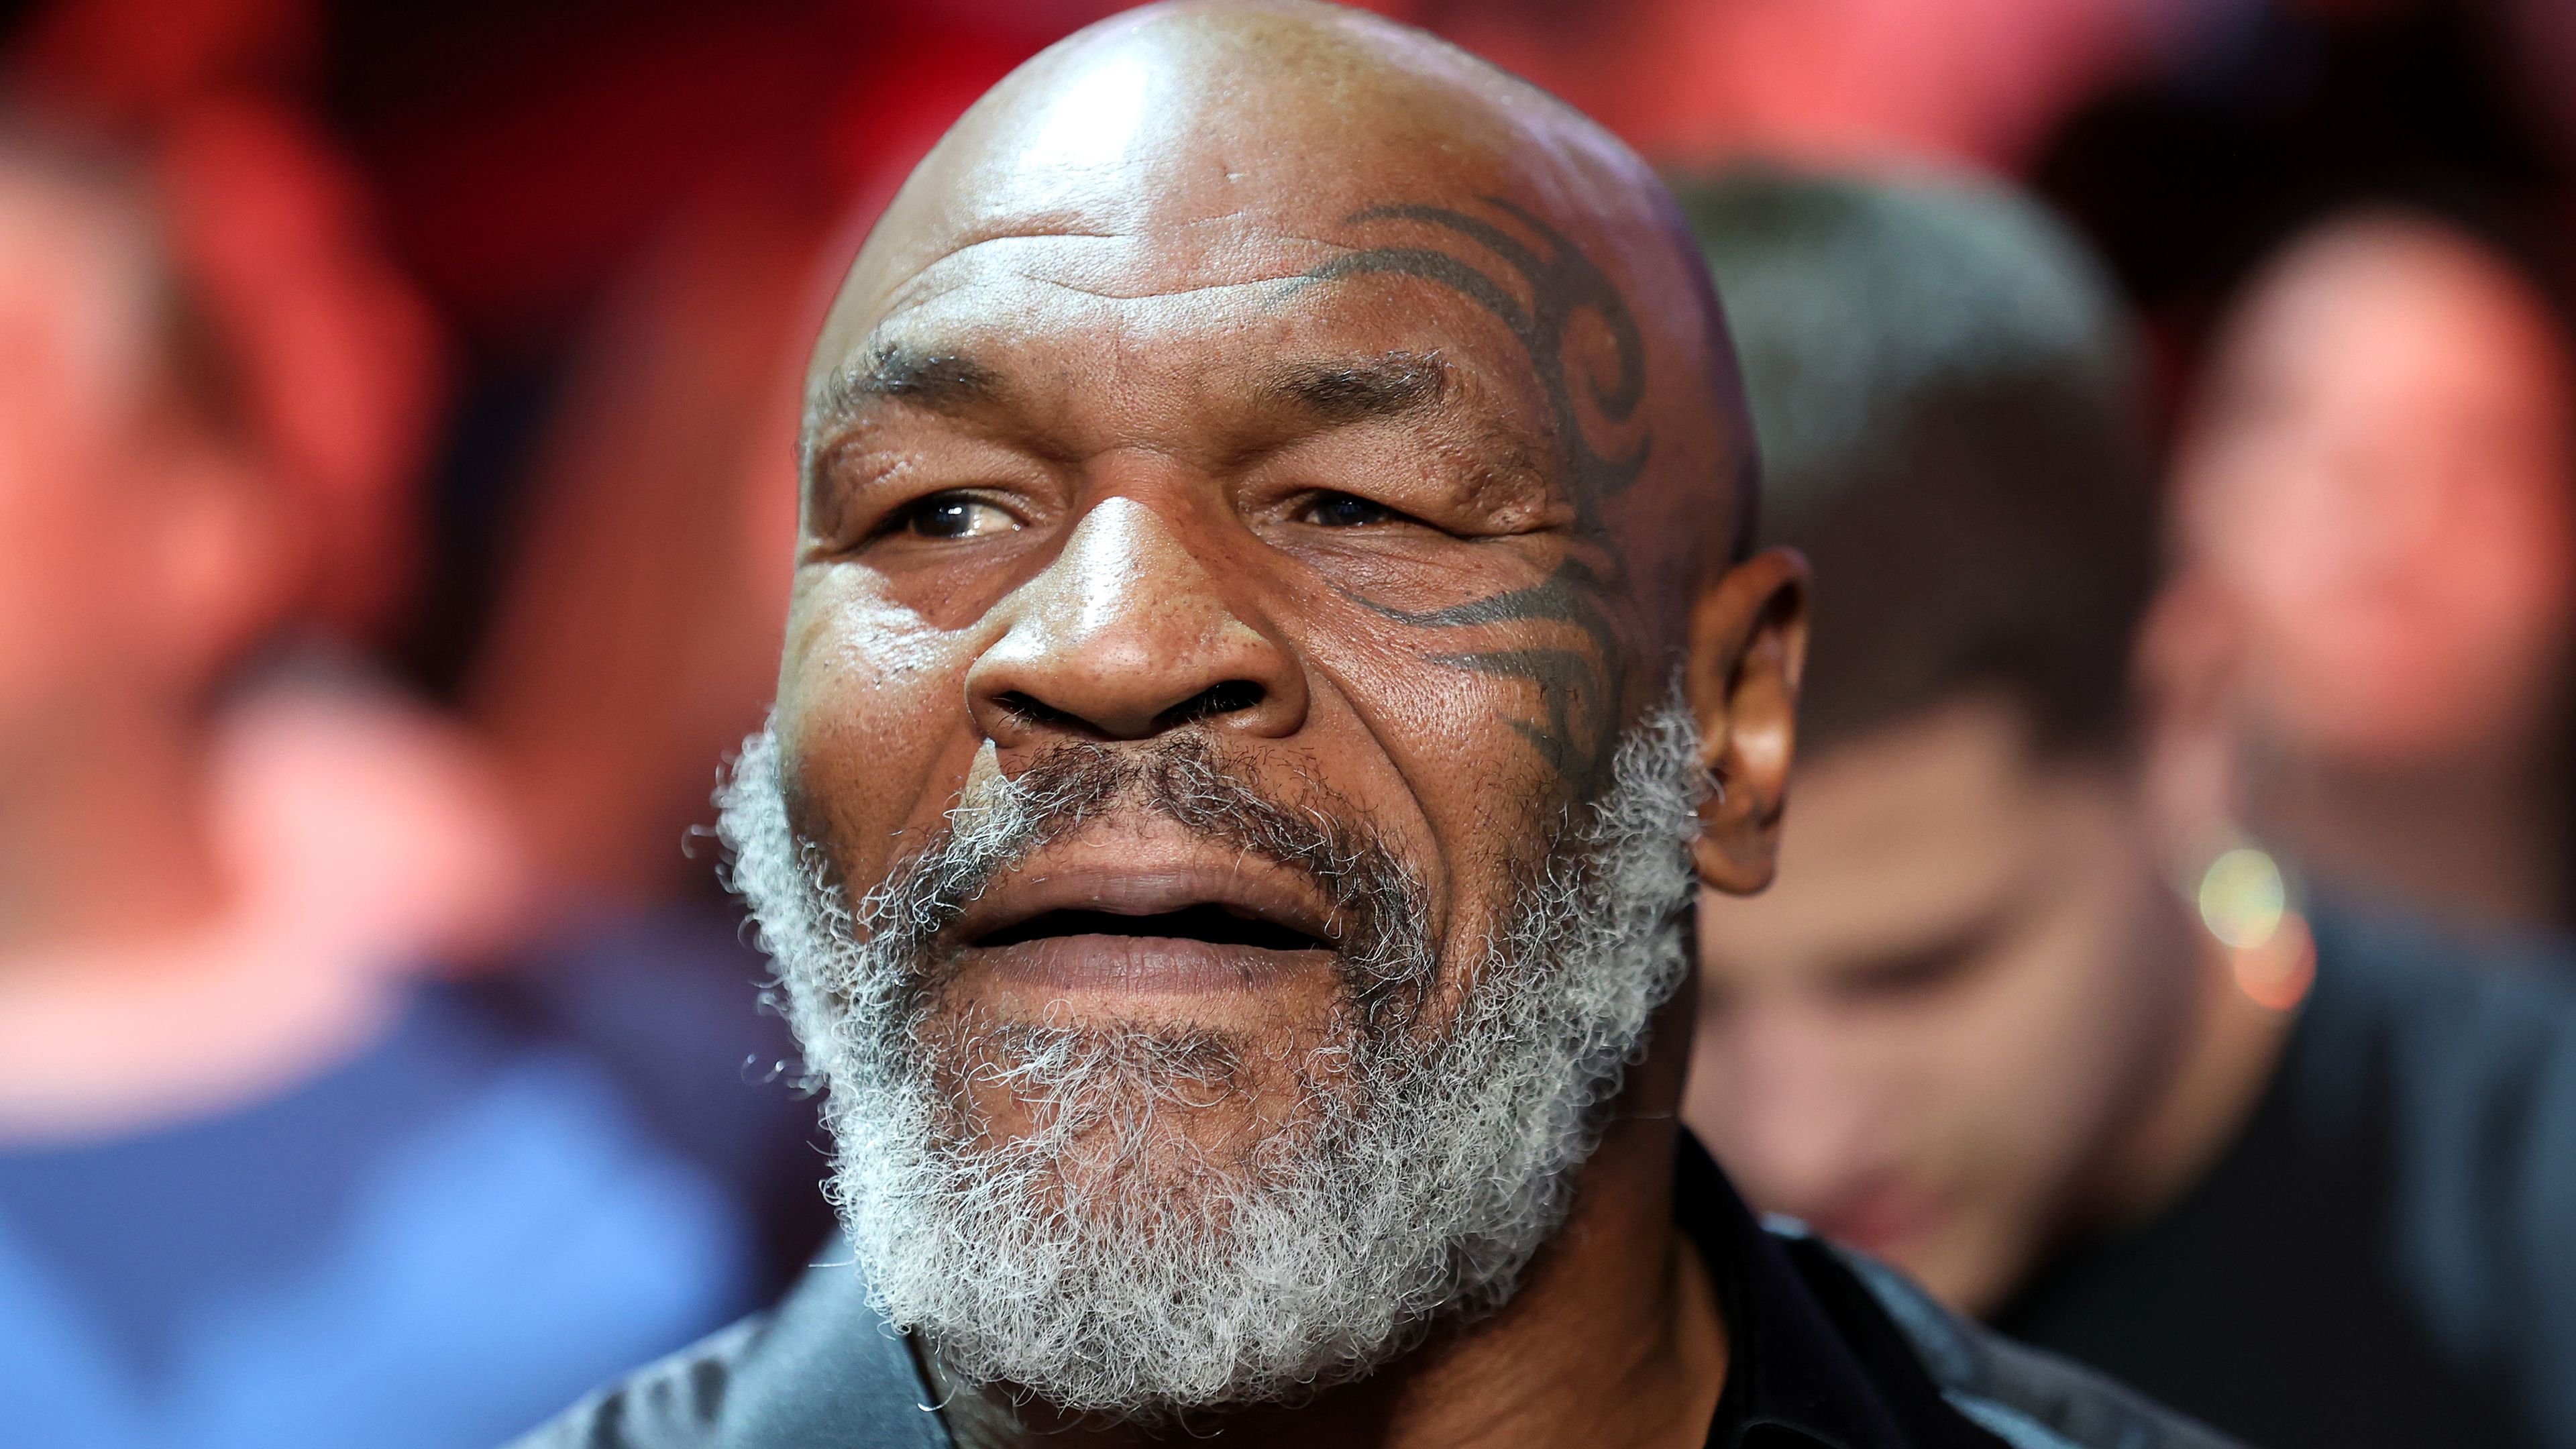 No charges against Mike Tyson for punching airplane passenger